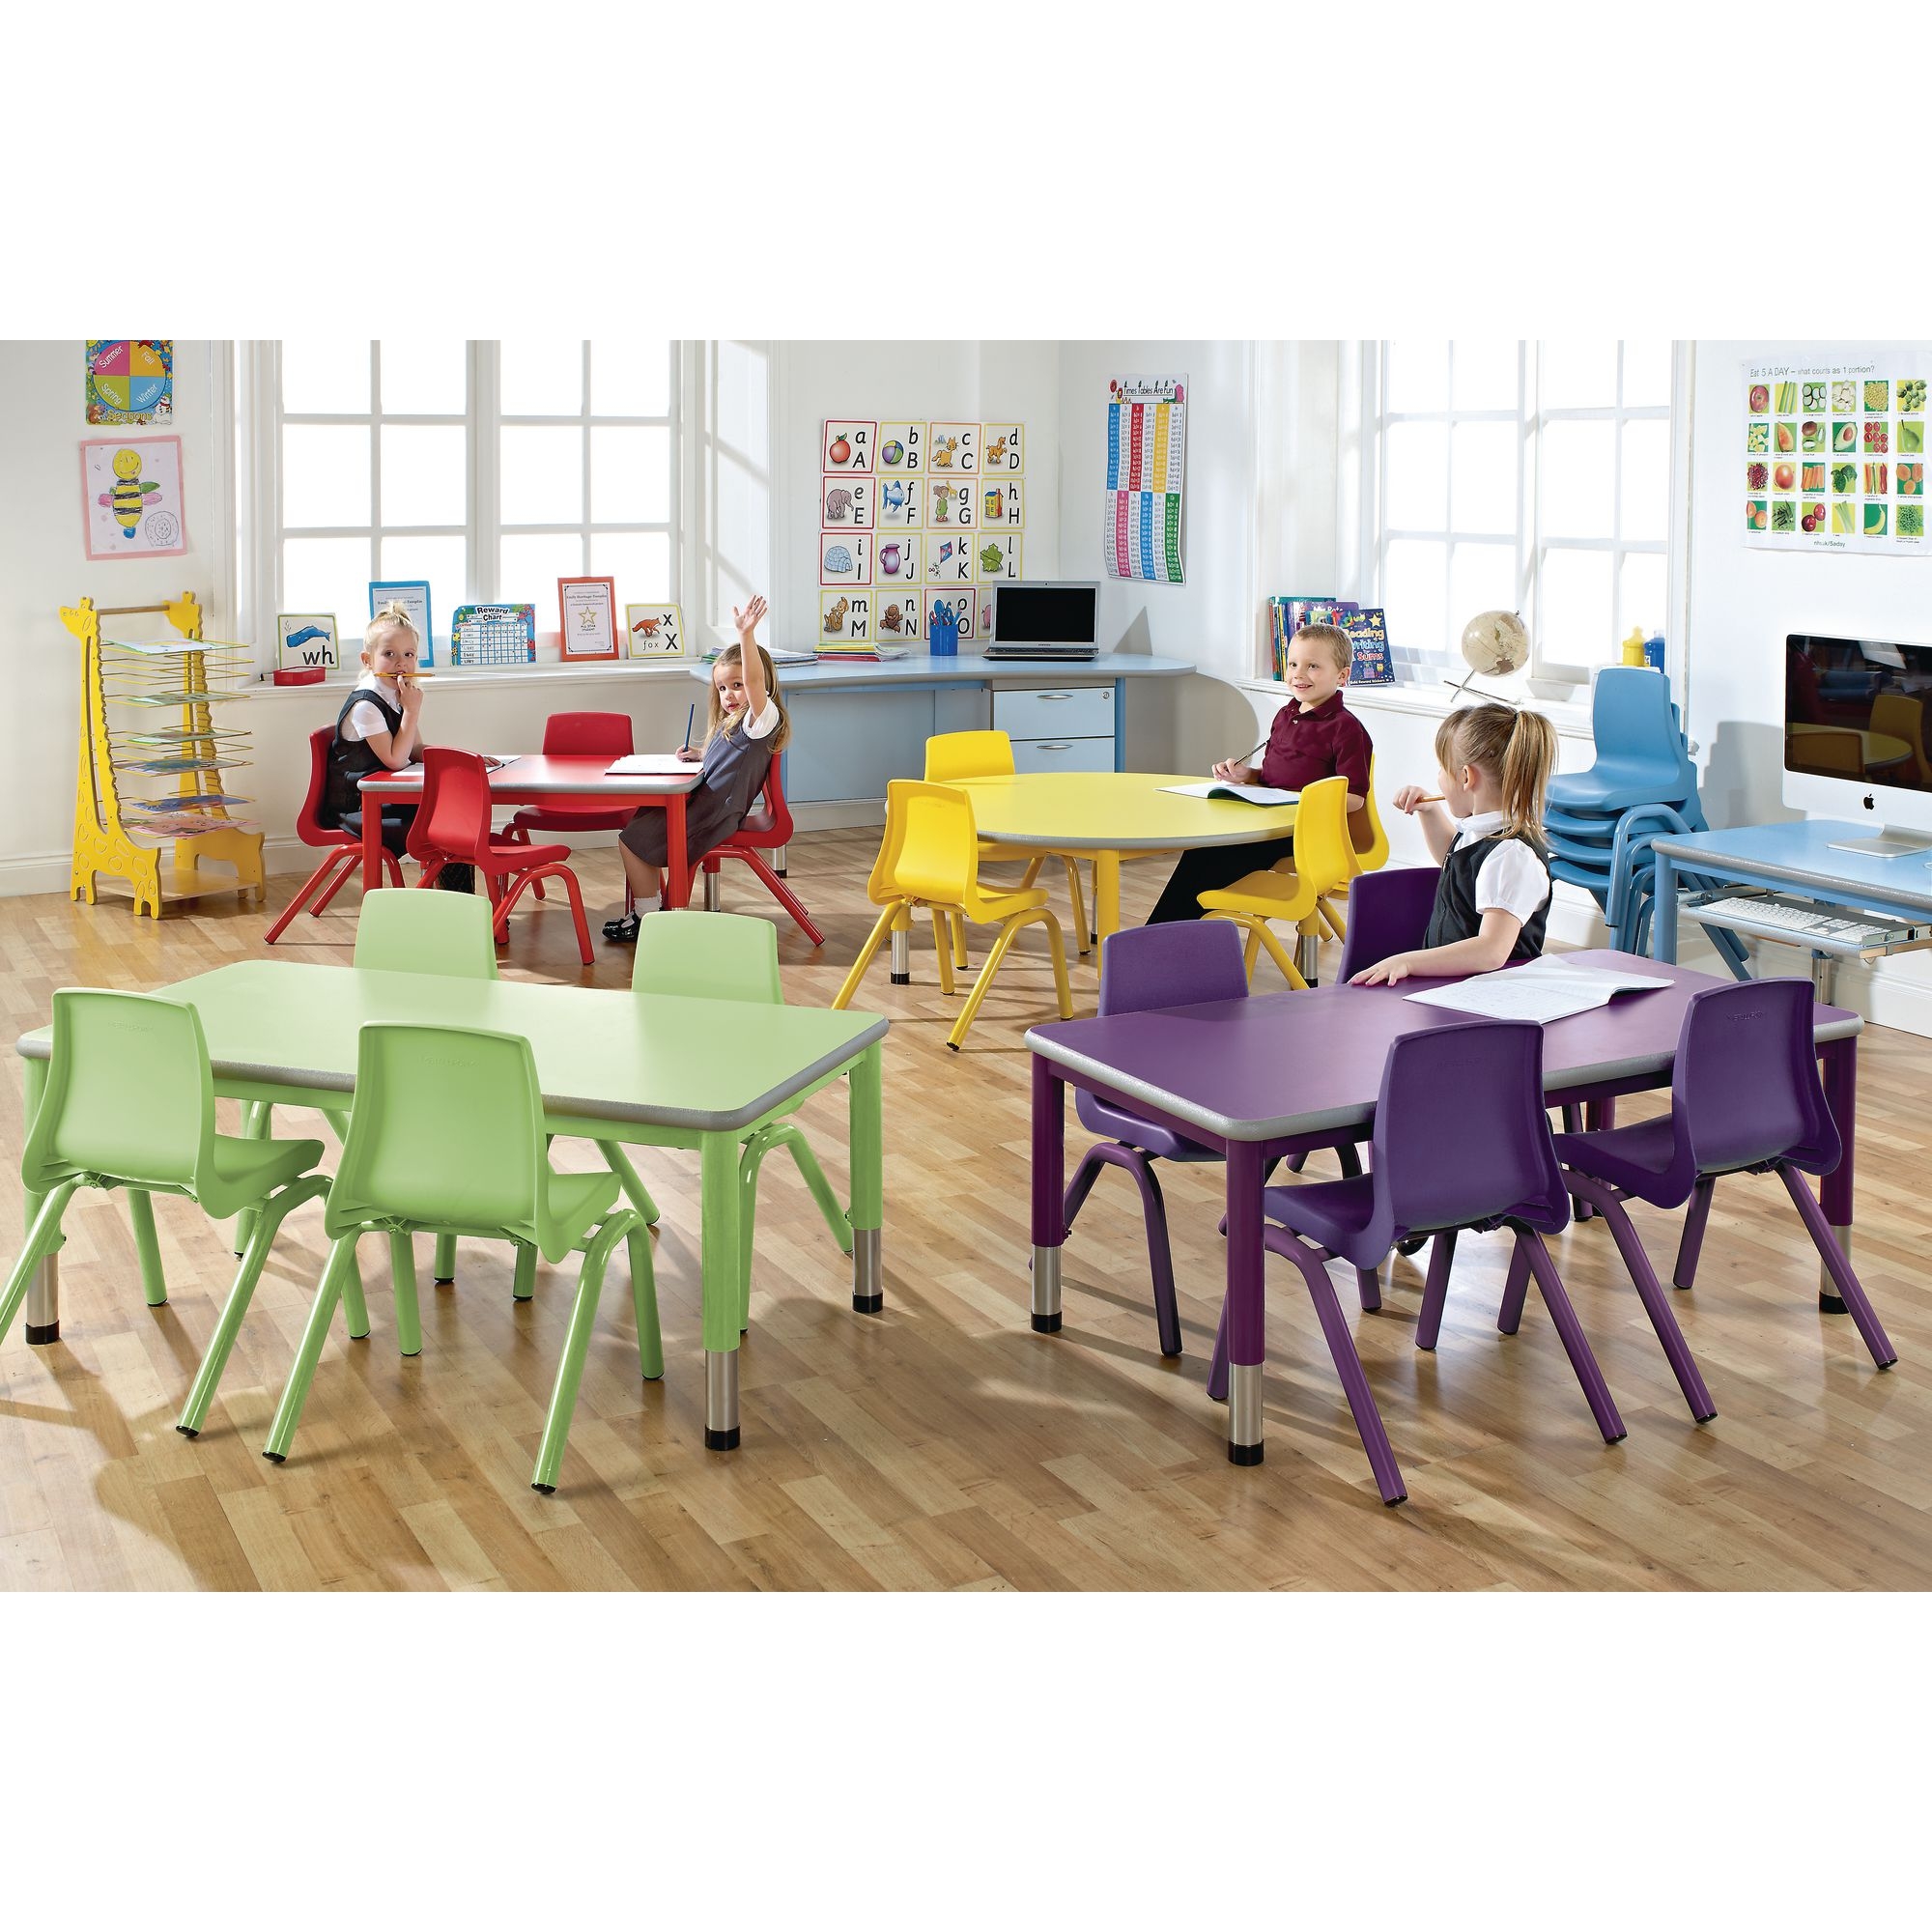 Harlequin Rectangular Height Adjustable Steel Classroom Pack: Table and 4 Chairs - 900 x 600 x 530mm - Tangy Lime